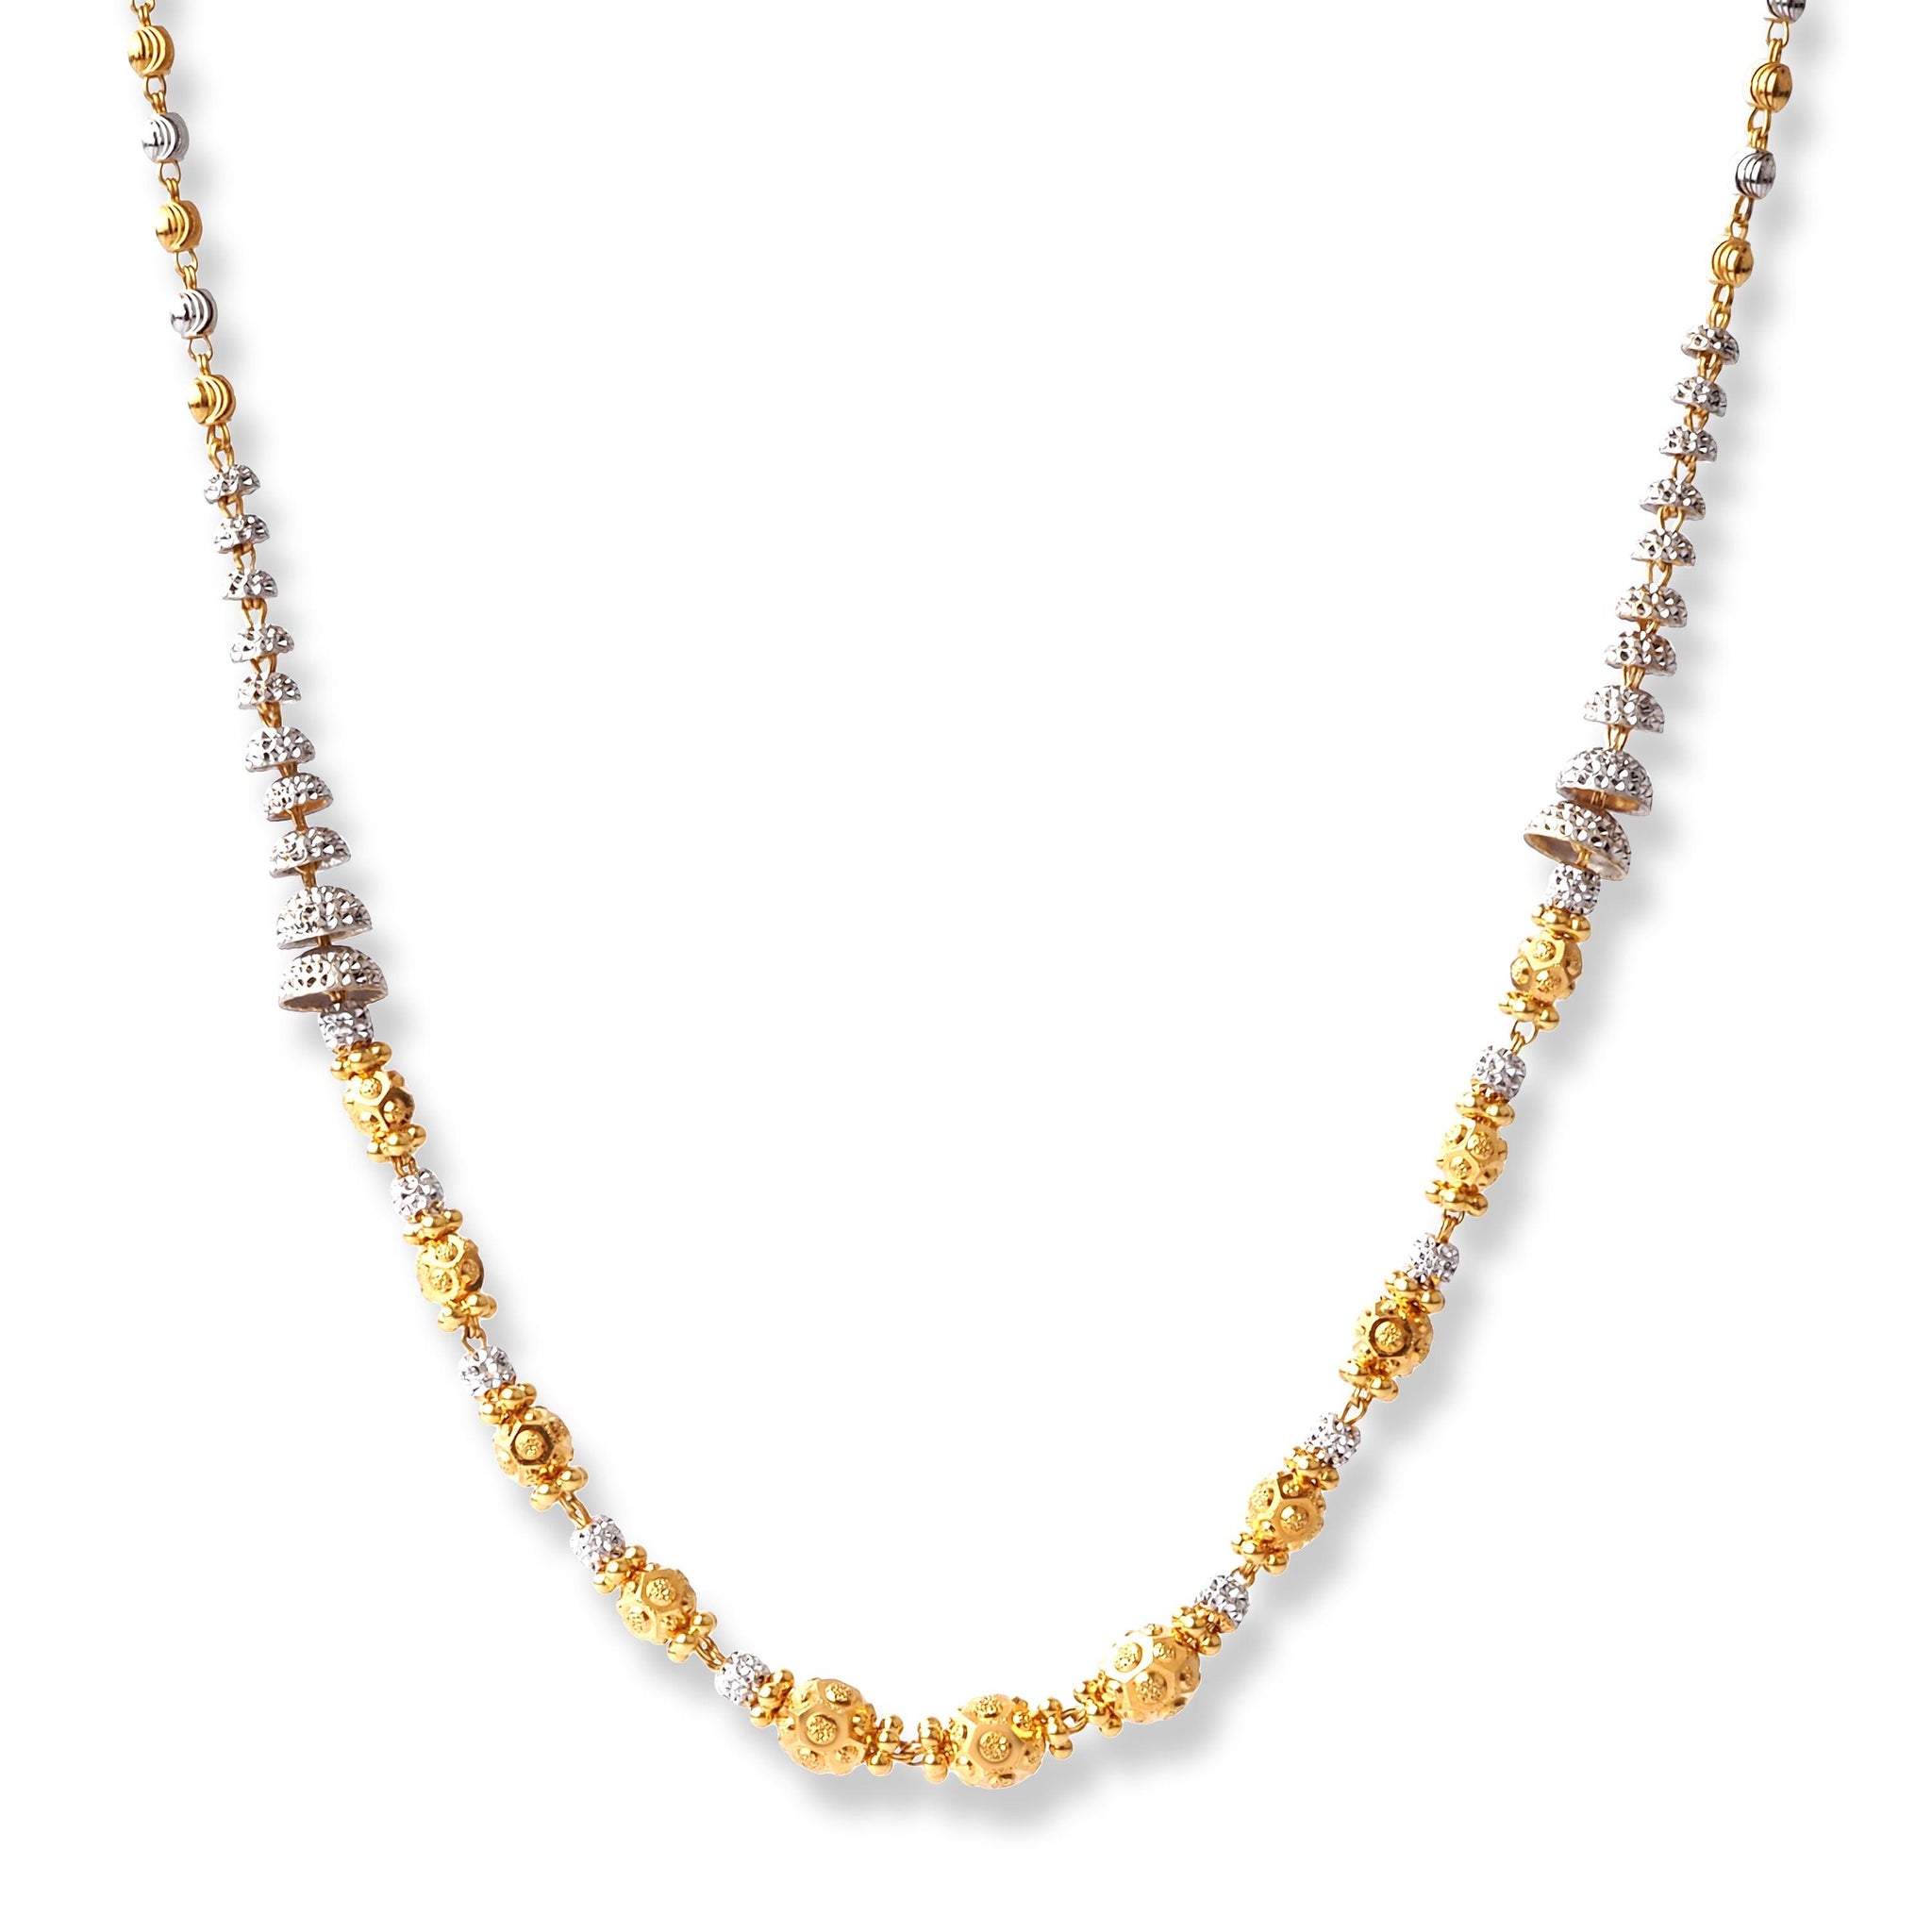 22ct Yellow Gold Long Beaded Necklaces with Rhodium Design (24g) N-6582